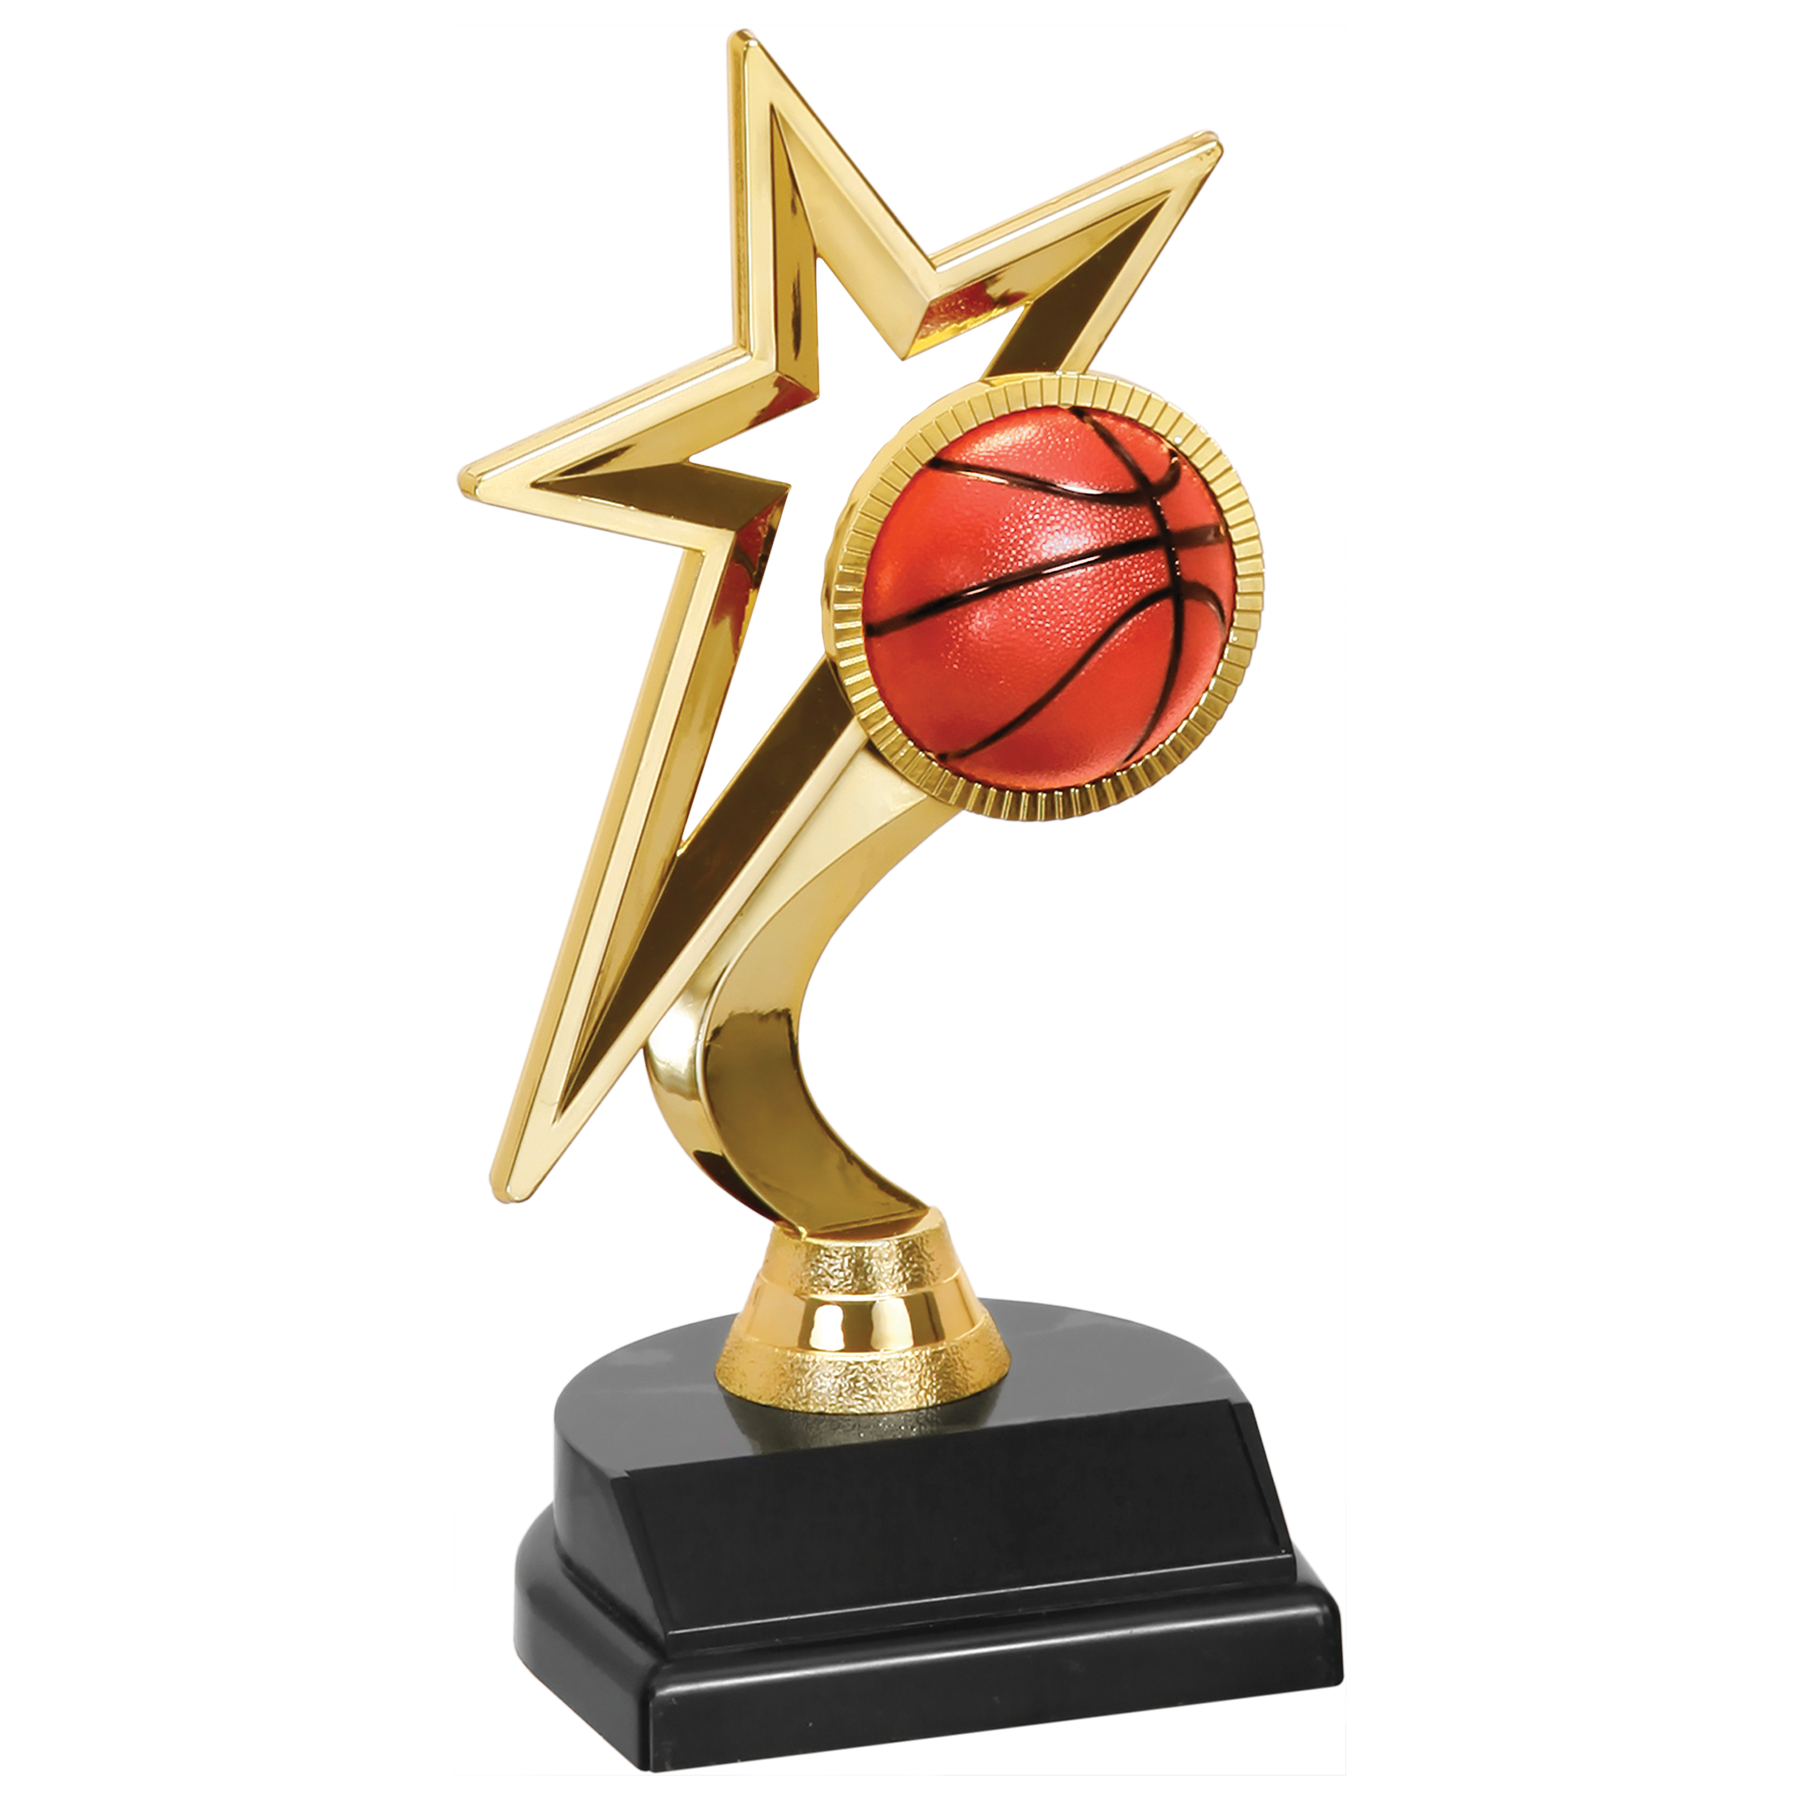 250mm TALL BASKETBALL GOLD TROPHY ACRYLIC *FREE ENGRAVING* NEW EXCLUSIVE 